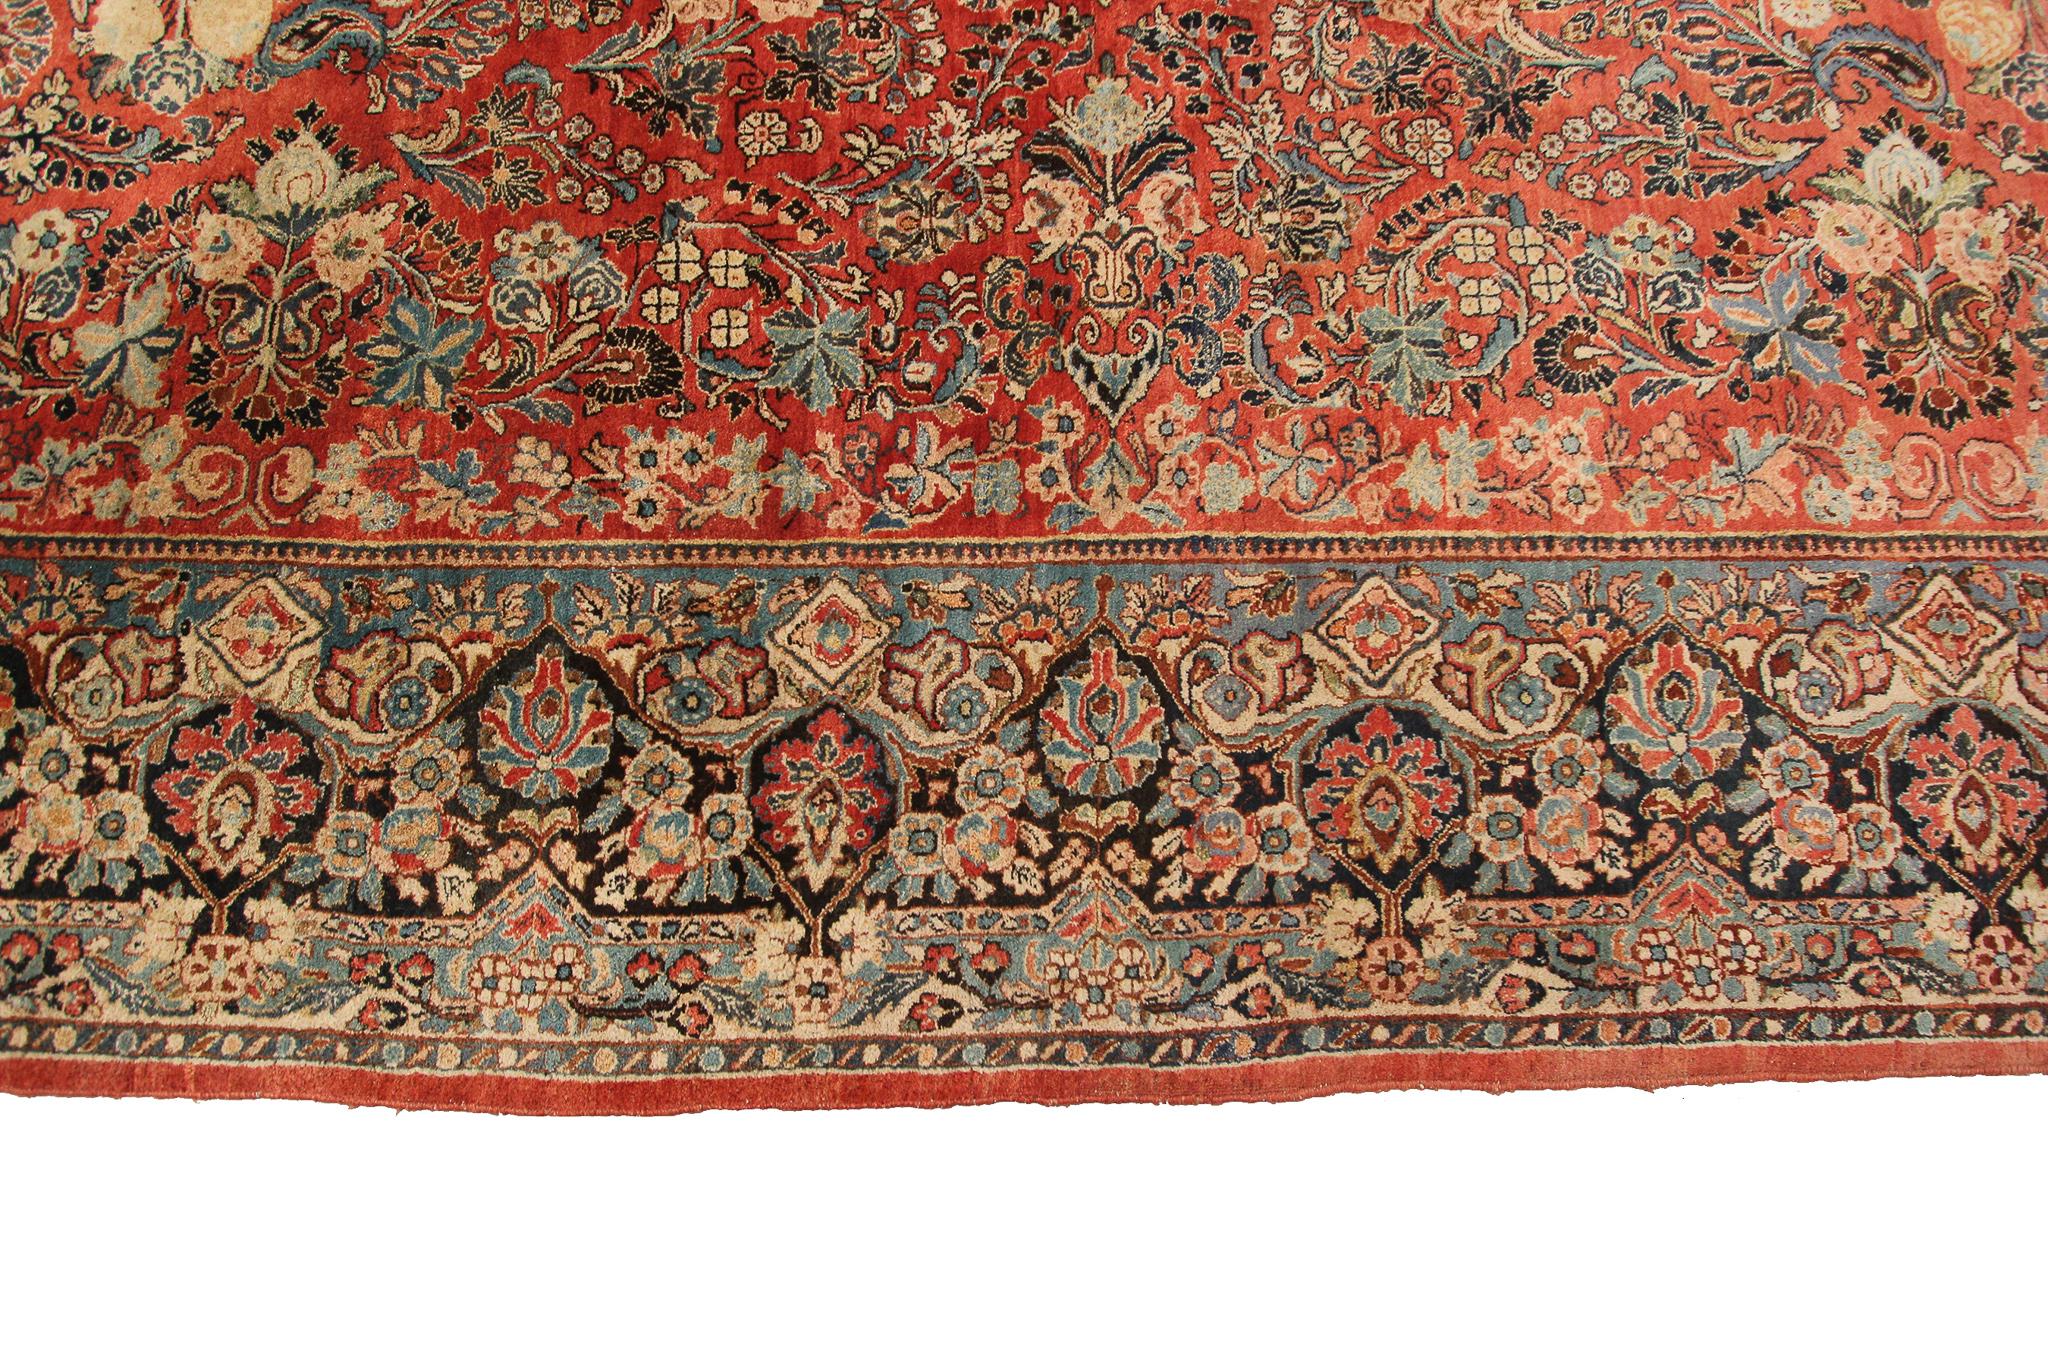 Late 19th Century Antique Mohajeran Rug Antique Persian Rug Geometric Floral For Sale